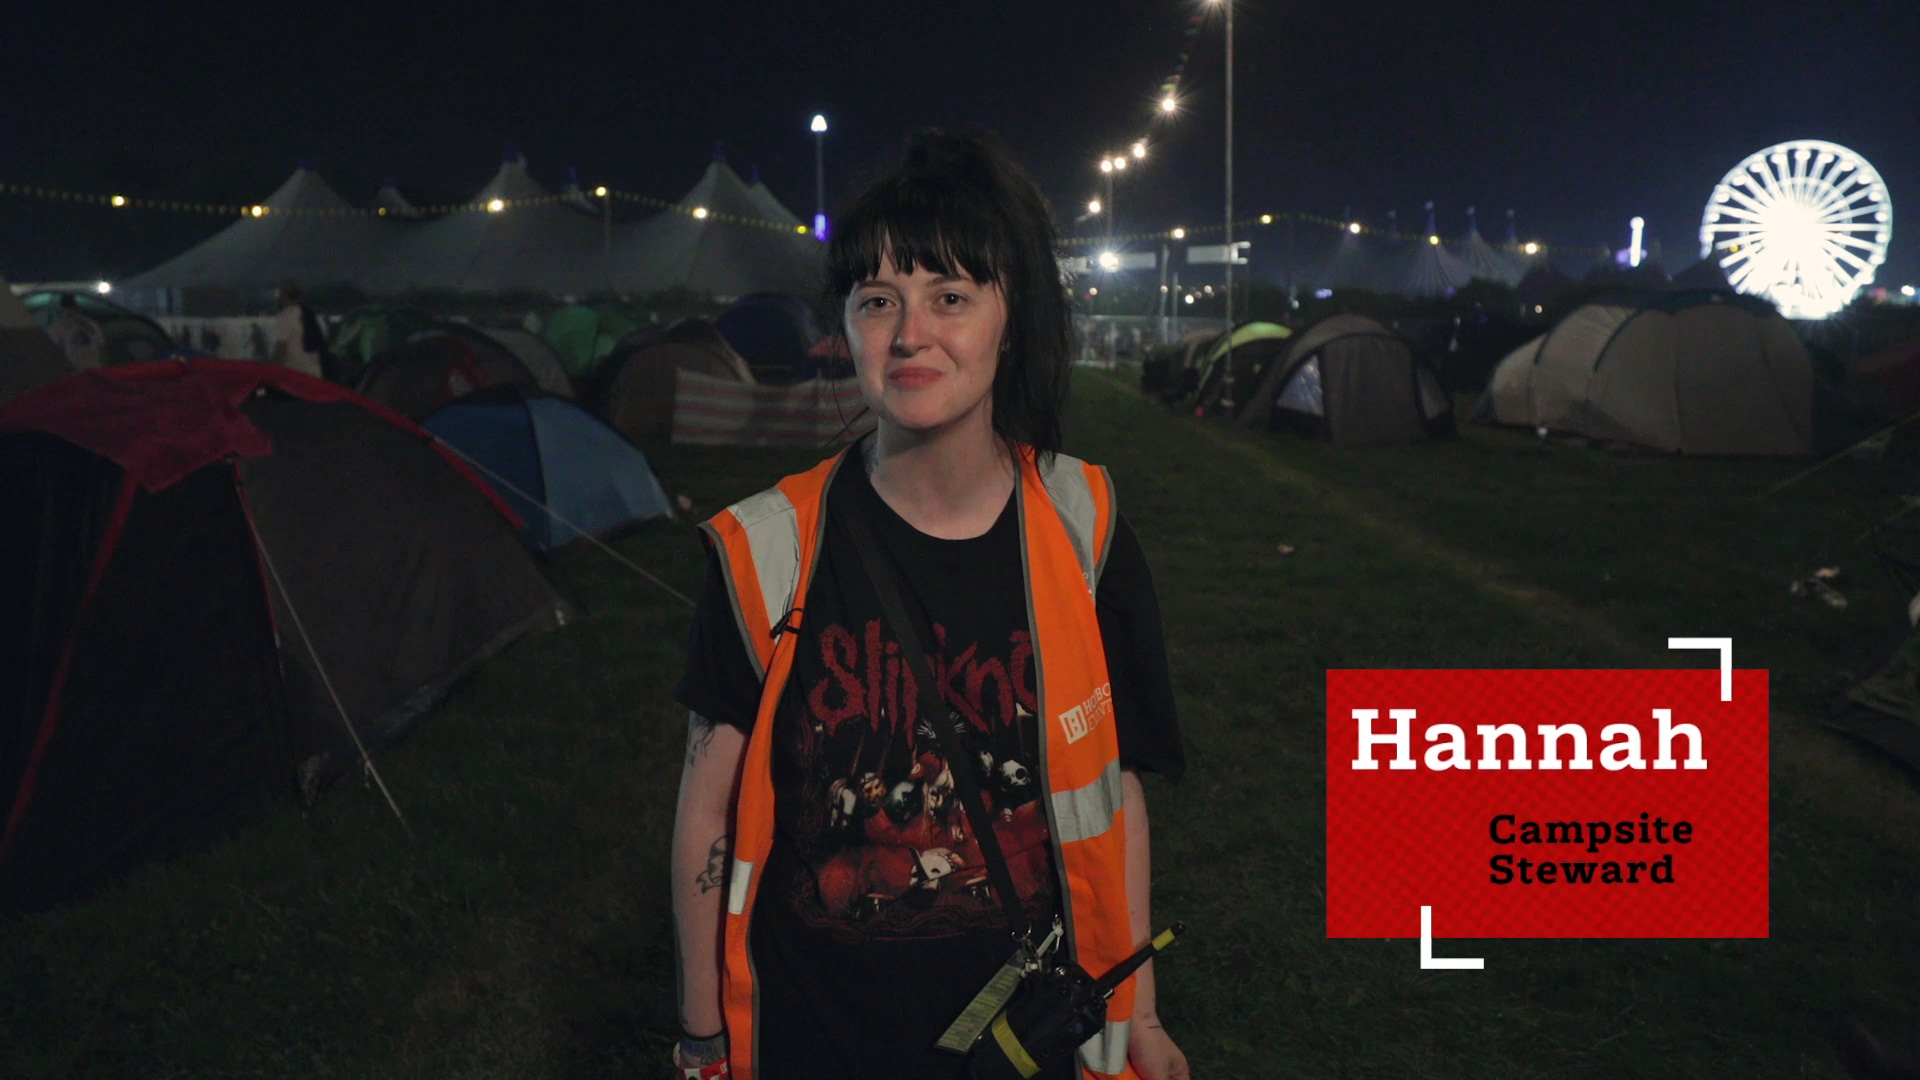 Hannah a Campsite Steward volunteering with Hotbox Events at Leeds Festival!